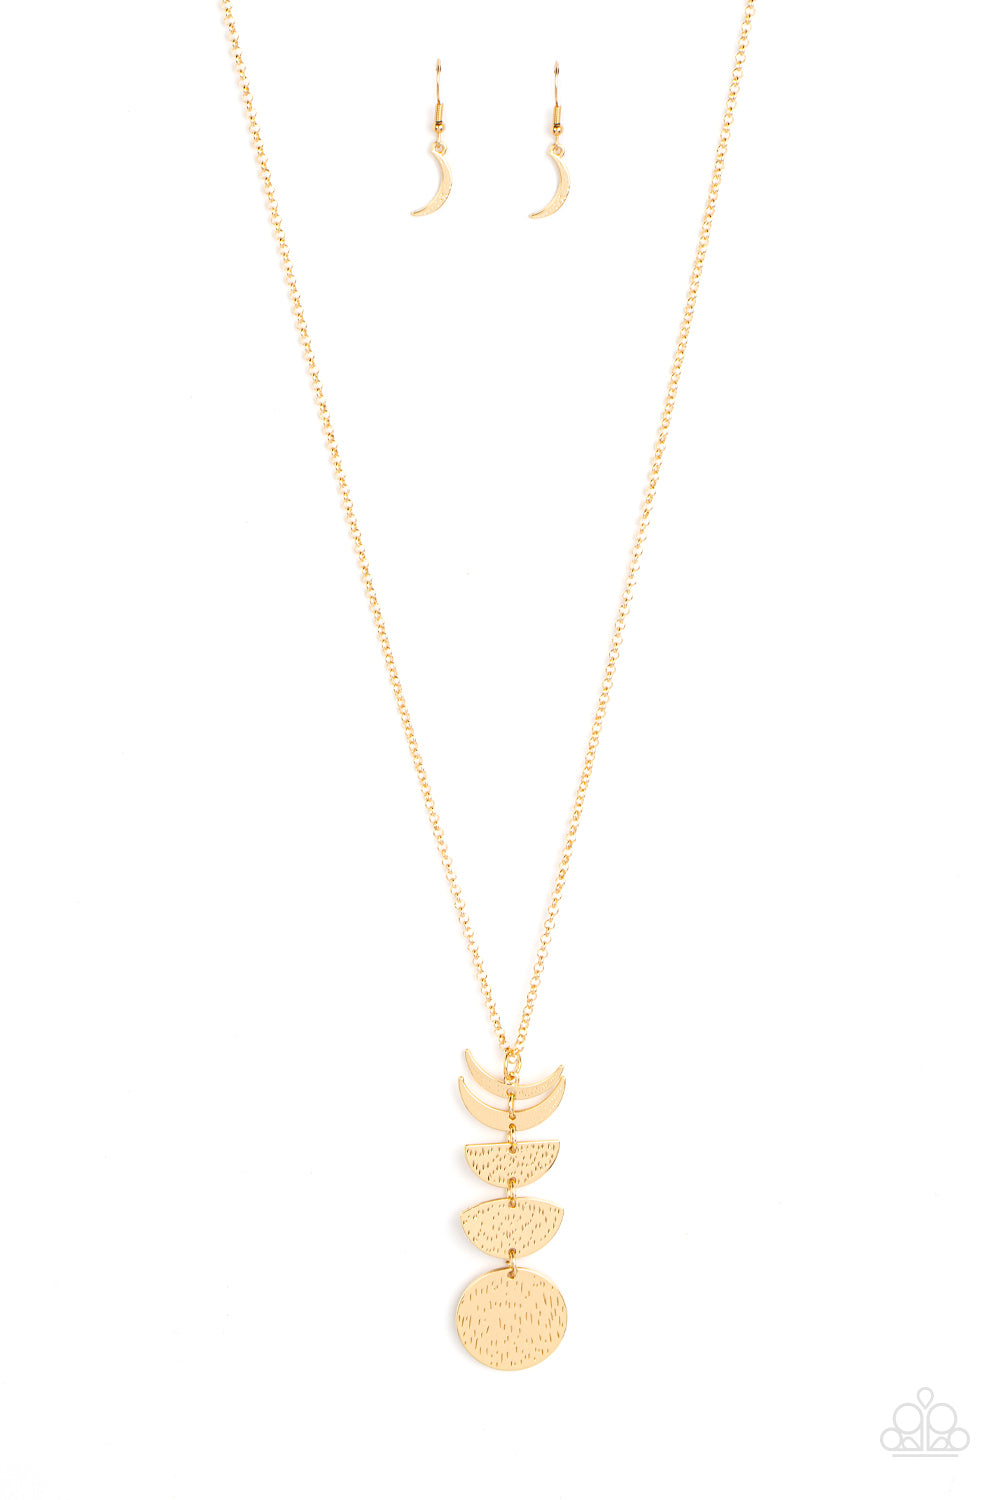 Phase Out - gold - Paparazzi necklace